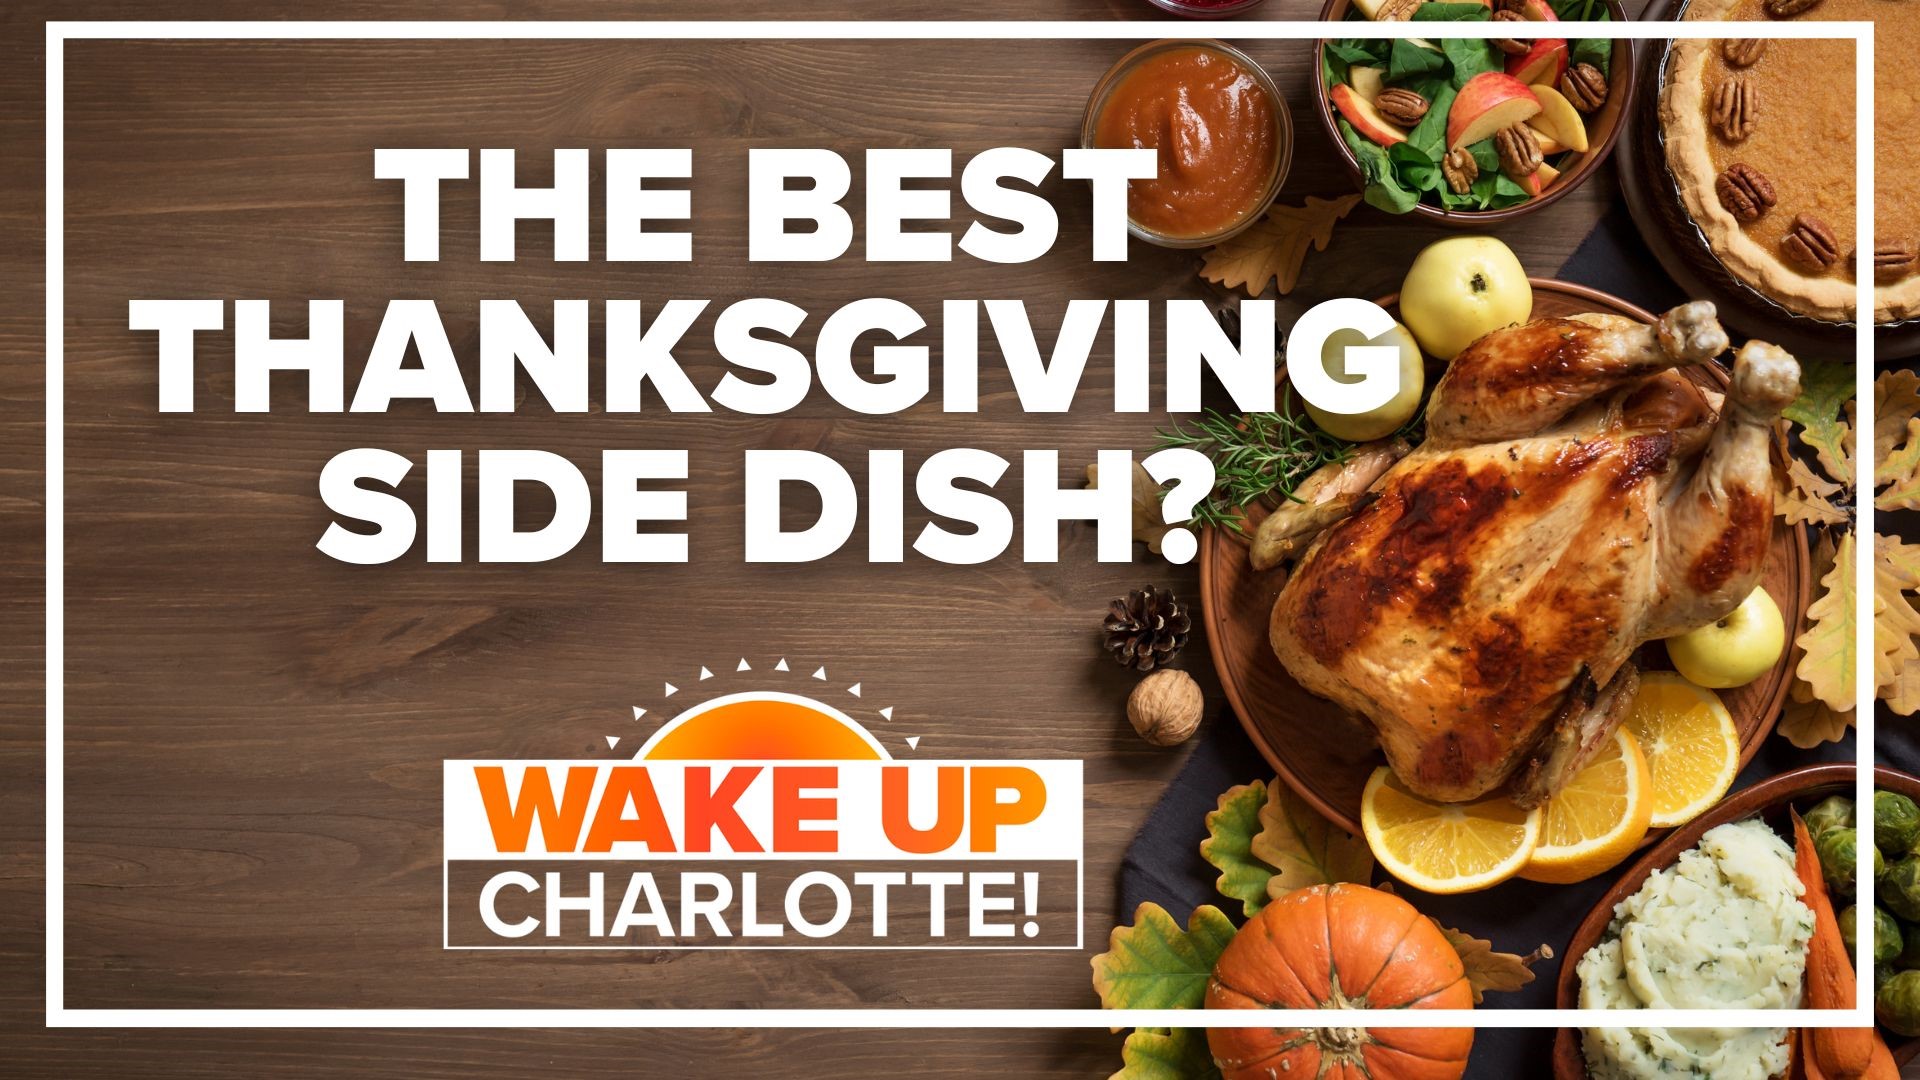 Thanksgiving is usually all about turkey, but a new poll found more people actually prefer the side dishes. What's the one side you can't live without?